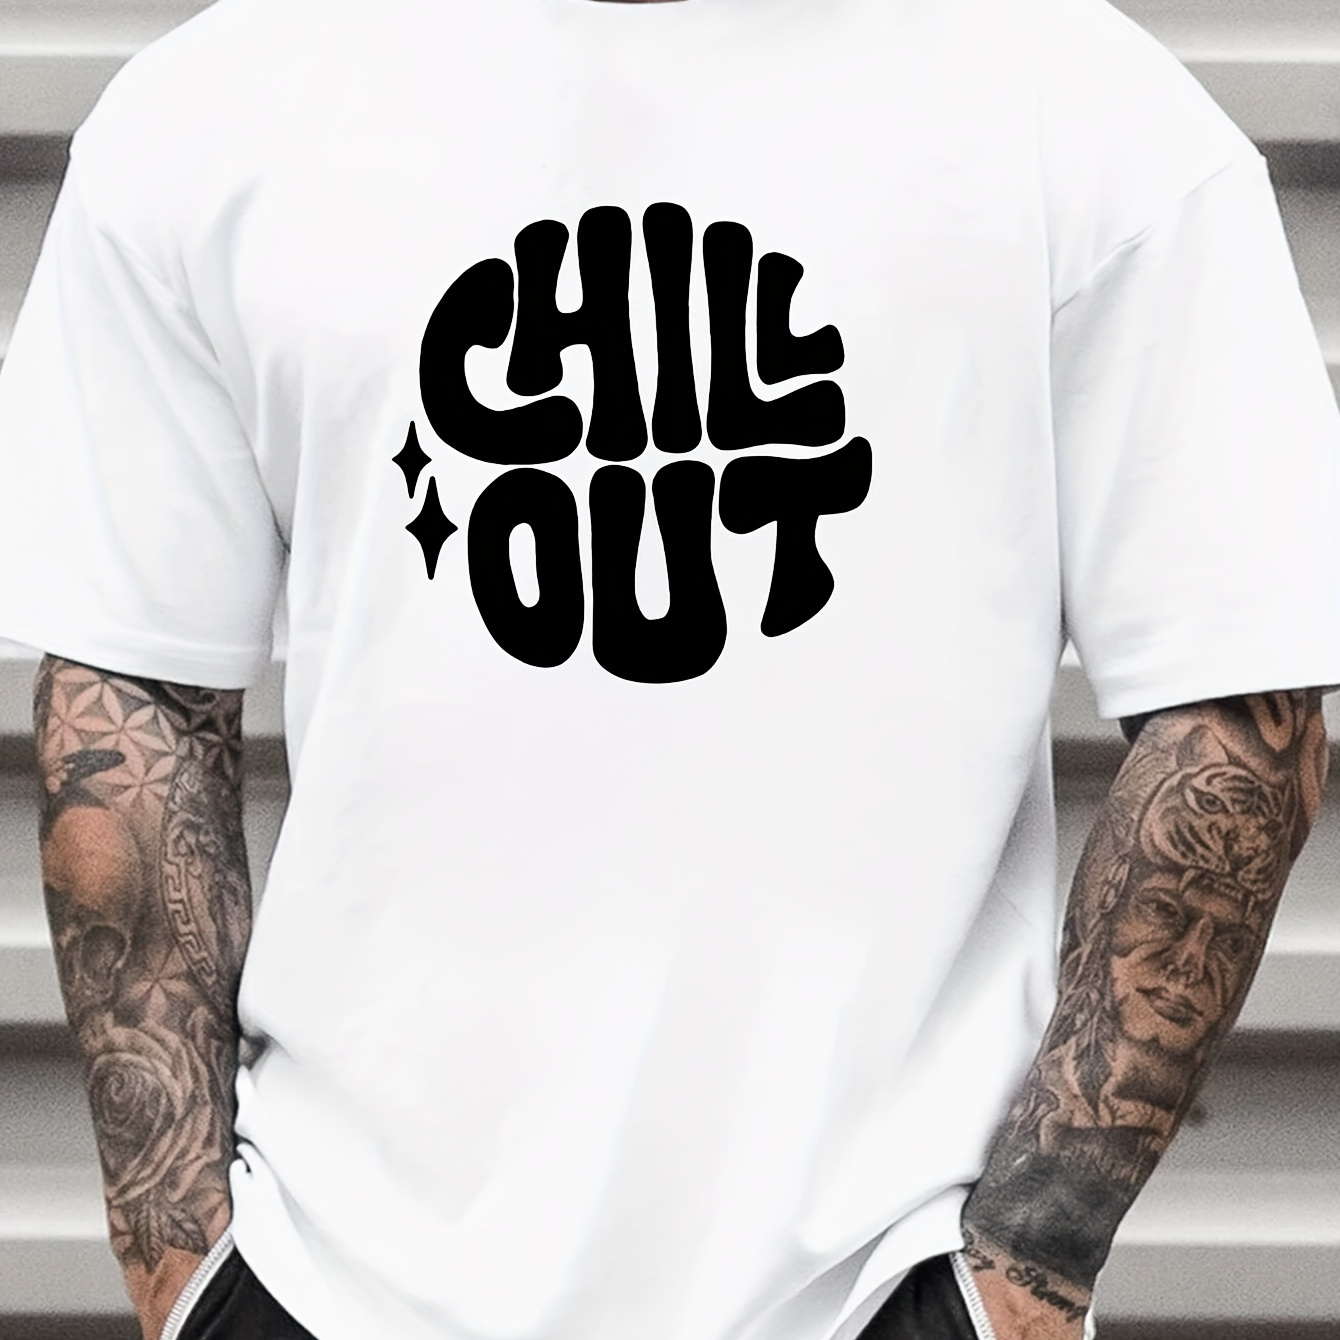 

Men's Pure Cotton T-shirt, 'chill Out' Letter Print Short Sleeve Crew Neck Tees For Summer, Casual Outdoor Comfy Clothing For Male